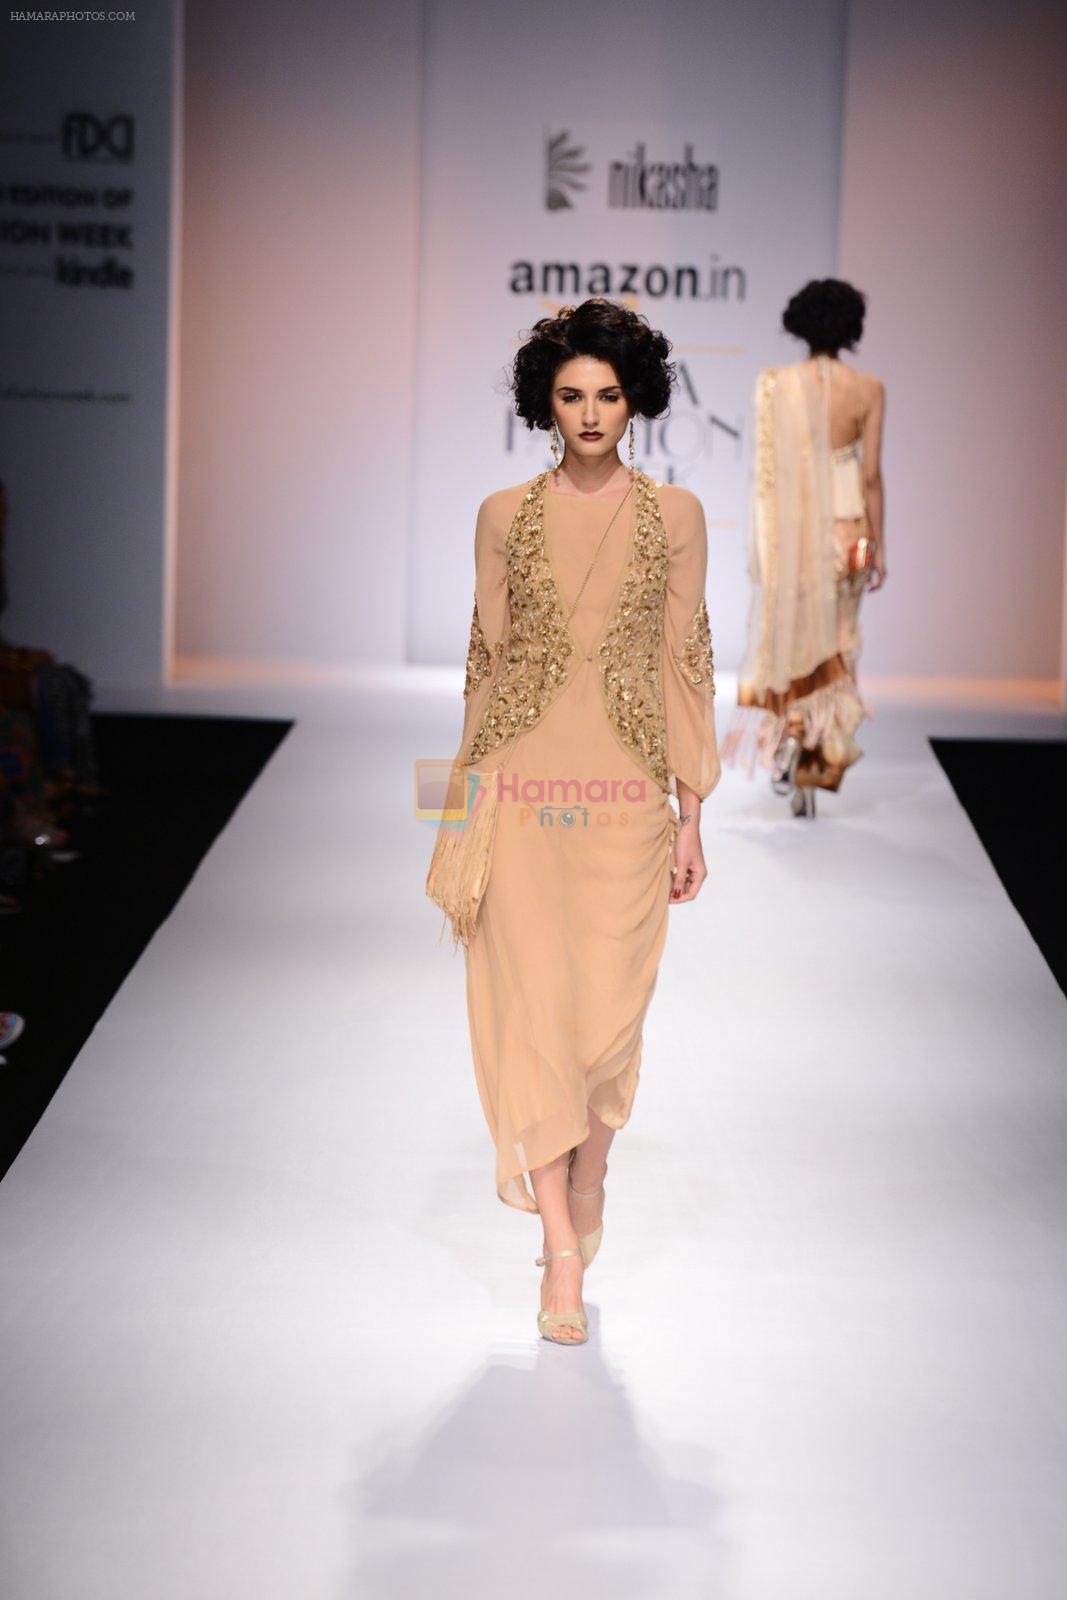 Model walk the ramp for Nikasha on day 1 of Amazon India Fashion Week on 25th March 2015